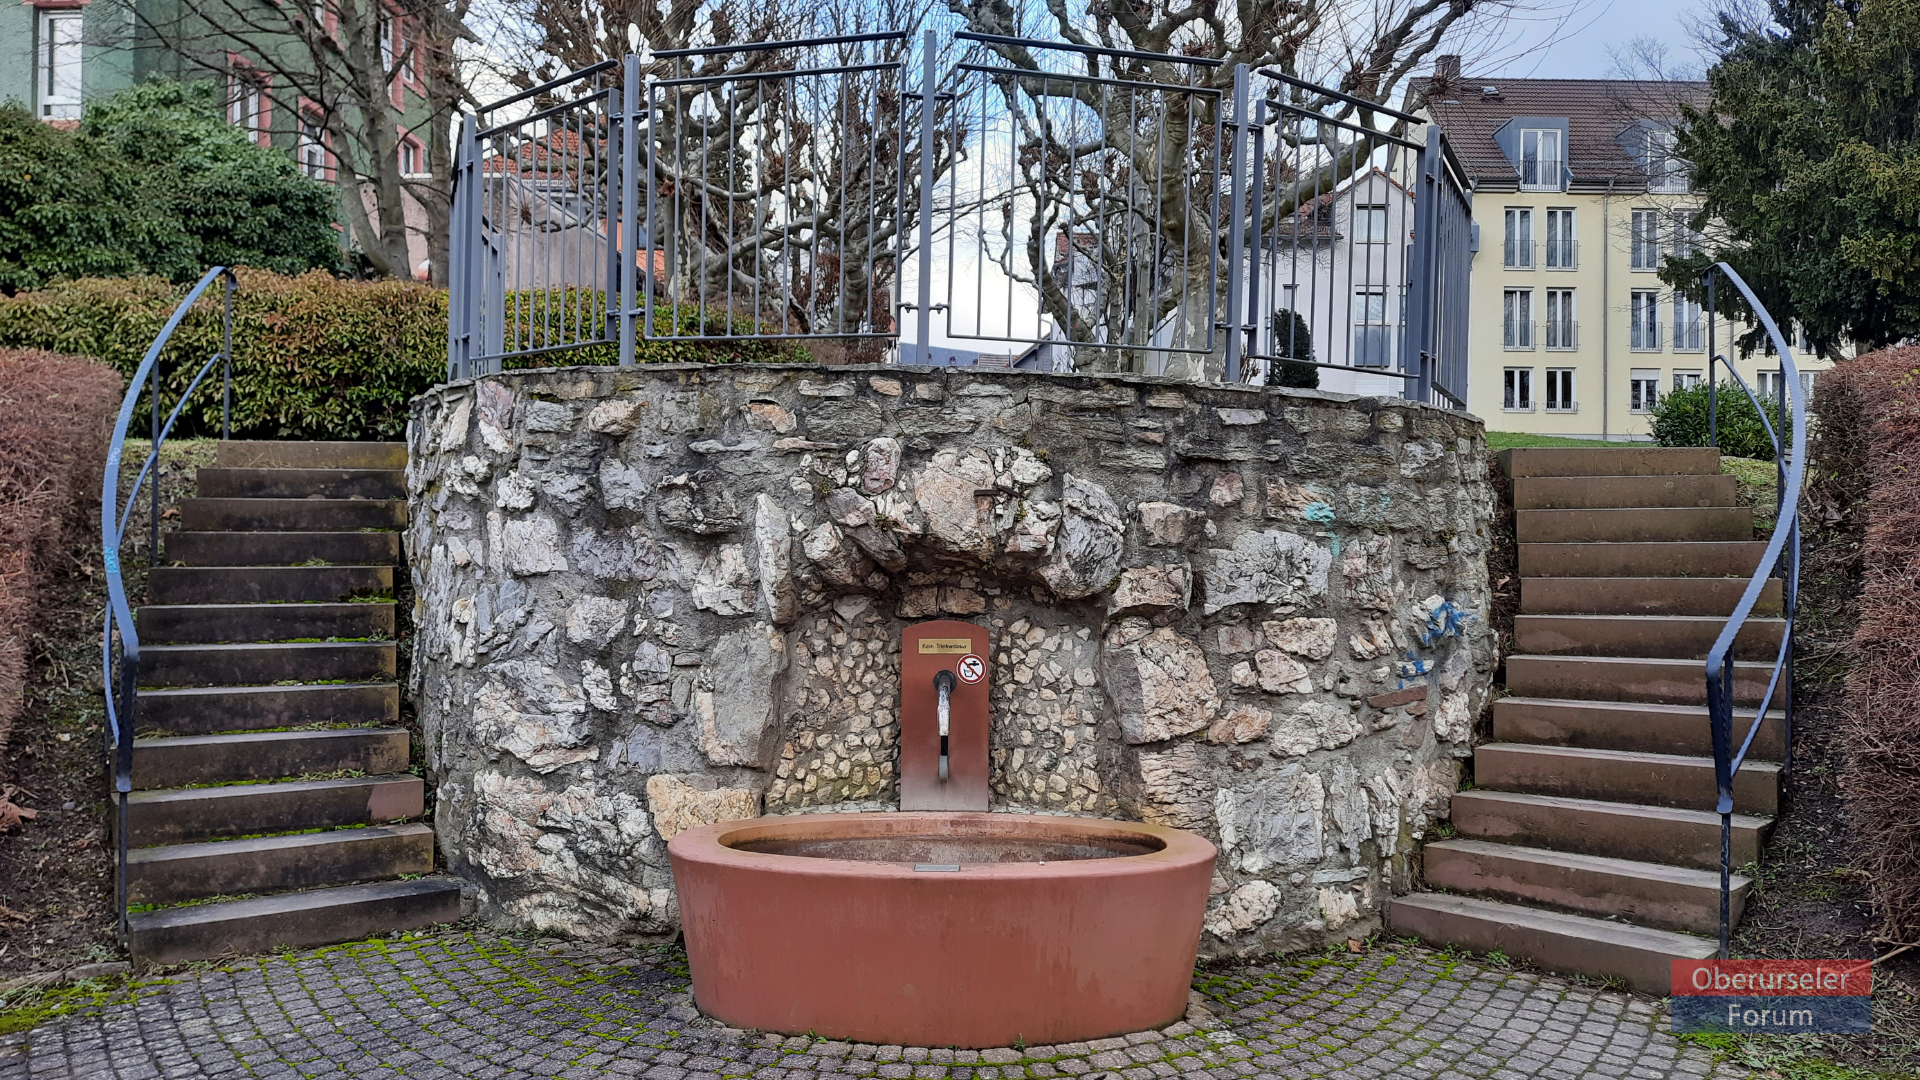 The old Marienbrunnen (Fountain) in Oberursel on Saturday, 22nd January, 2022